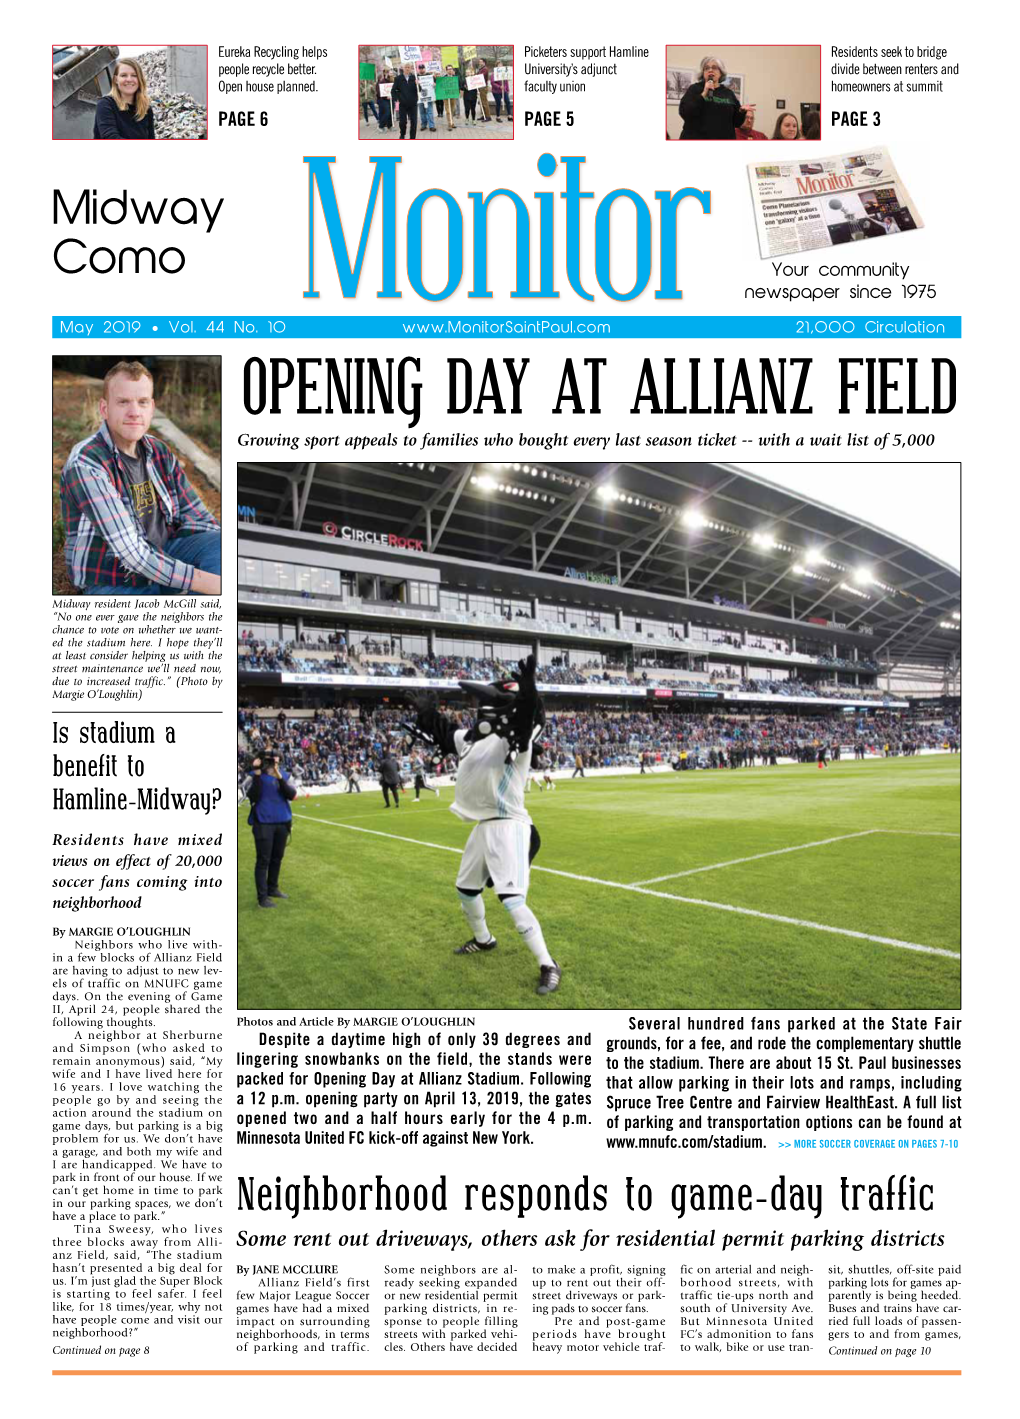 OPENING DAY at ALLIANZ FIELD Growing Sport Appeals to Families Who Bought Every Last Season Ticket -- with a Wait List of 5,000